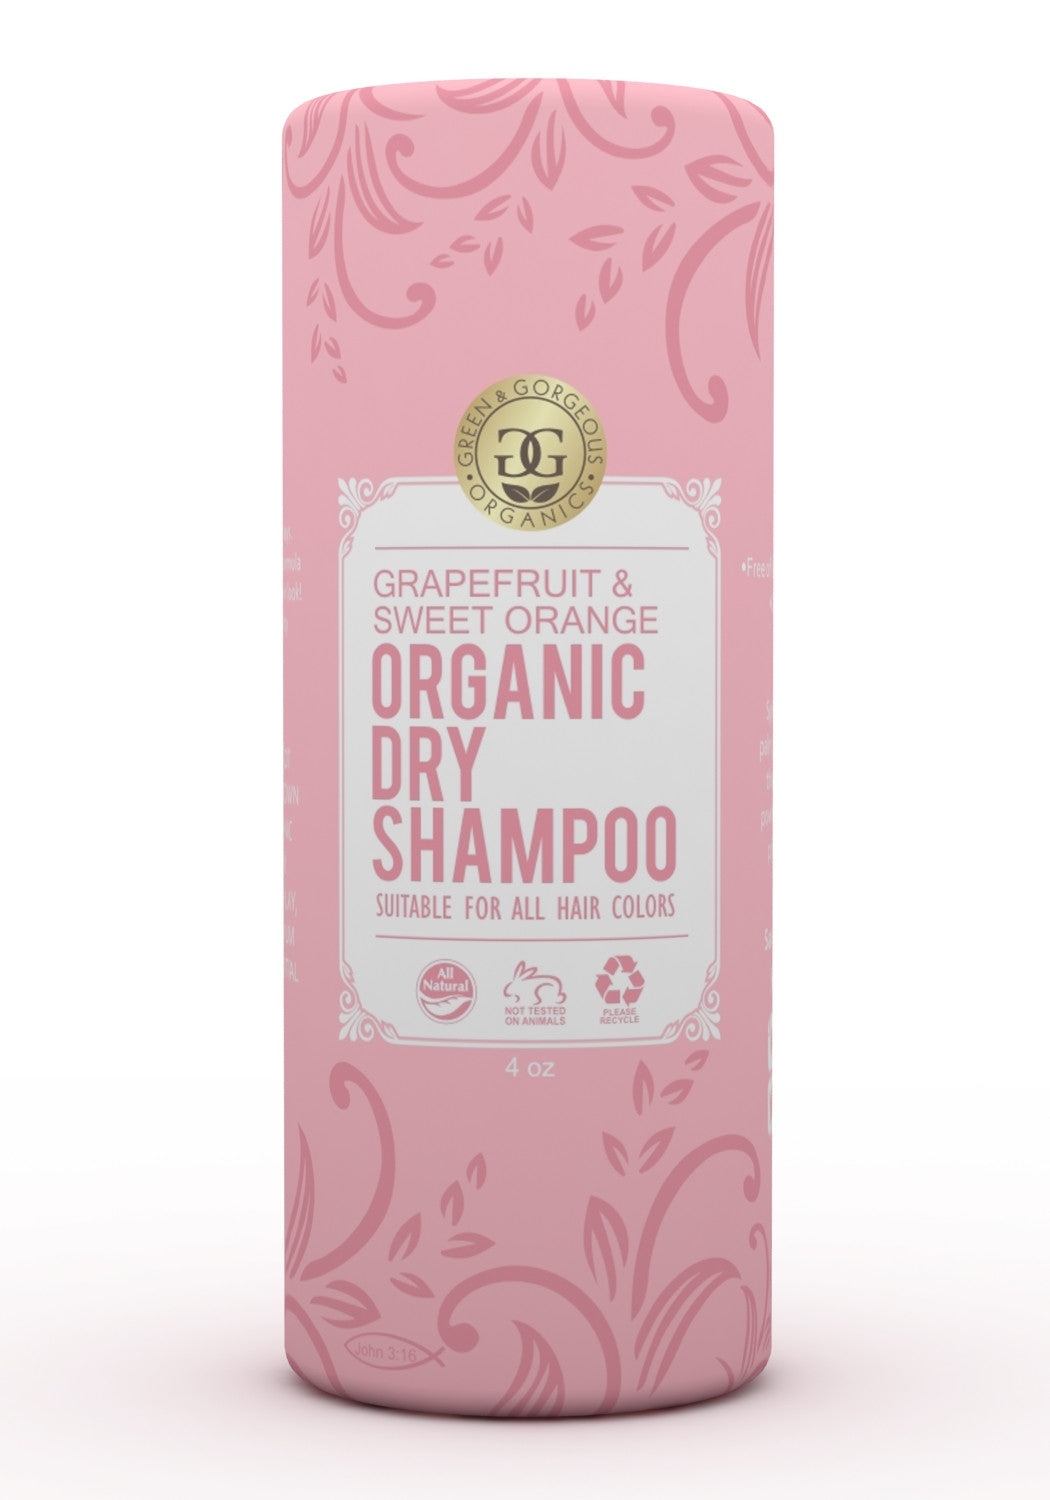 Organic Natural Dry Shampoo Powder for All and Oily Hair Types - Grapefruit and Sweet Orange